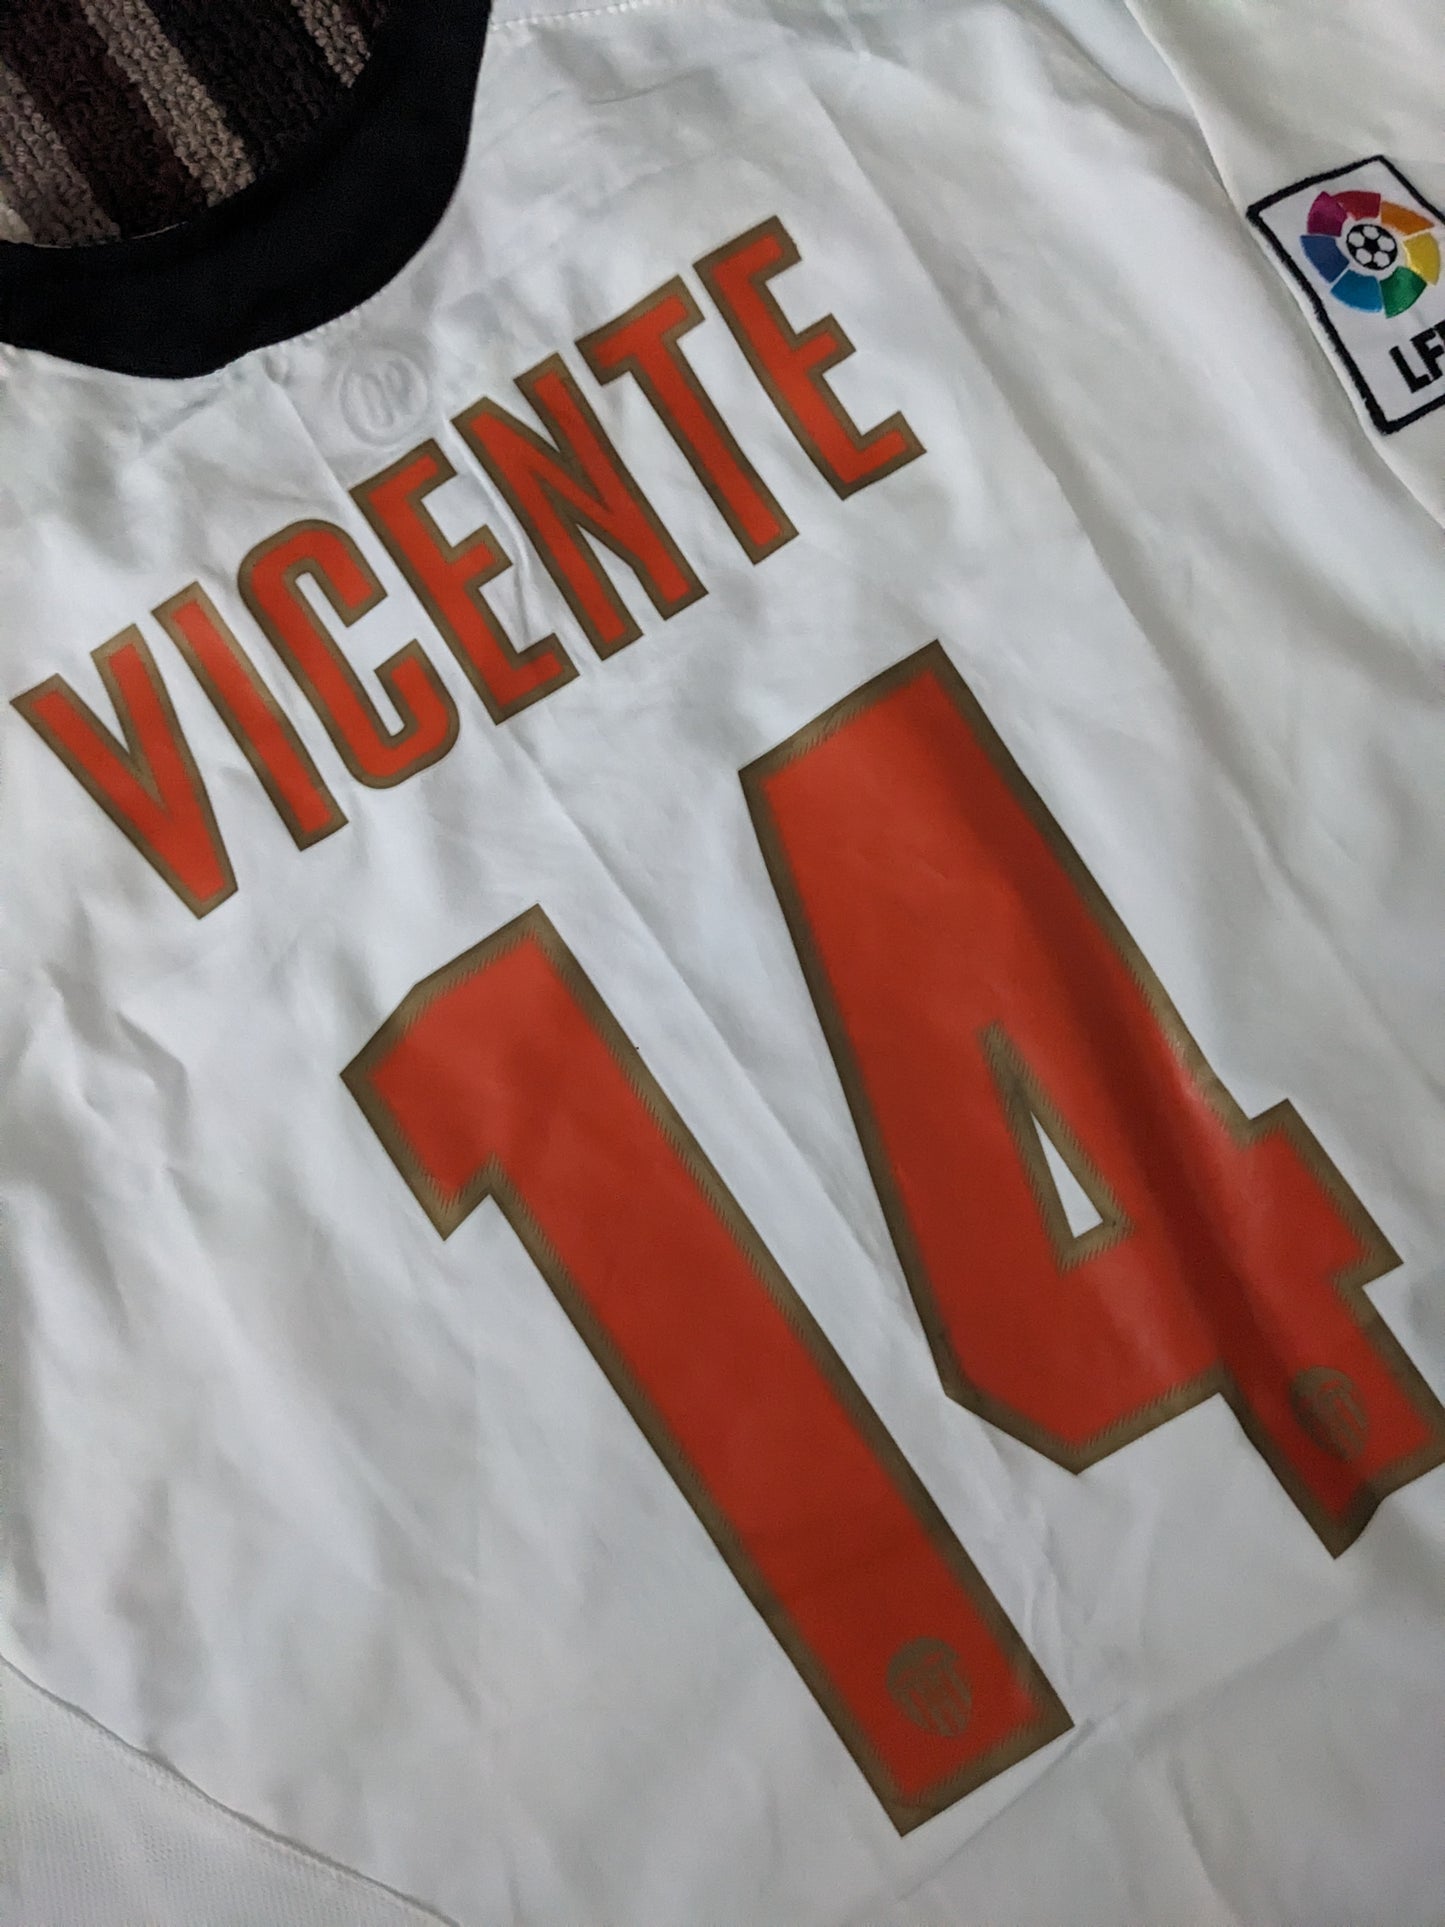 VALENCIA HOME FOOTBALL SHIRT 2005/2006 SOCCER JERSEY (XL) *Brand new with tags